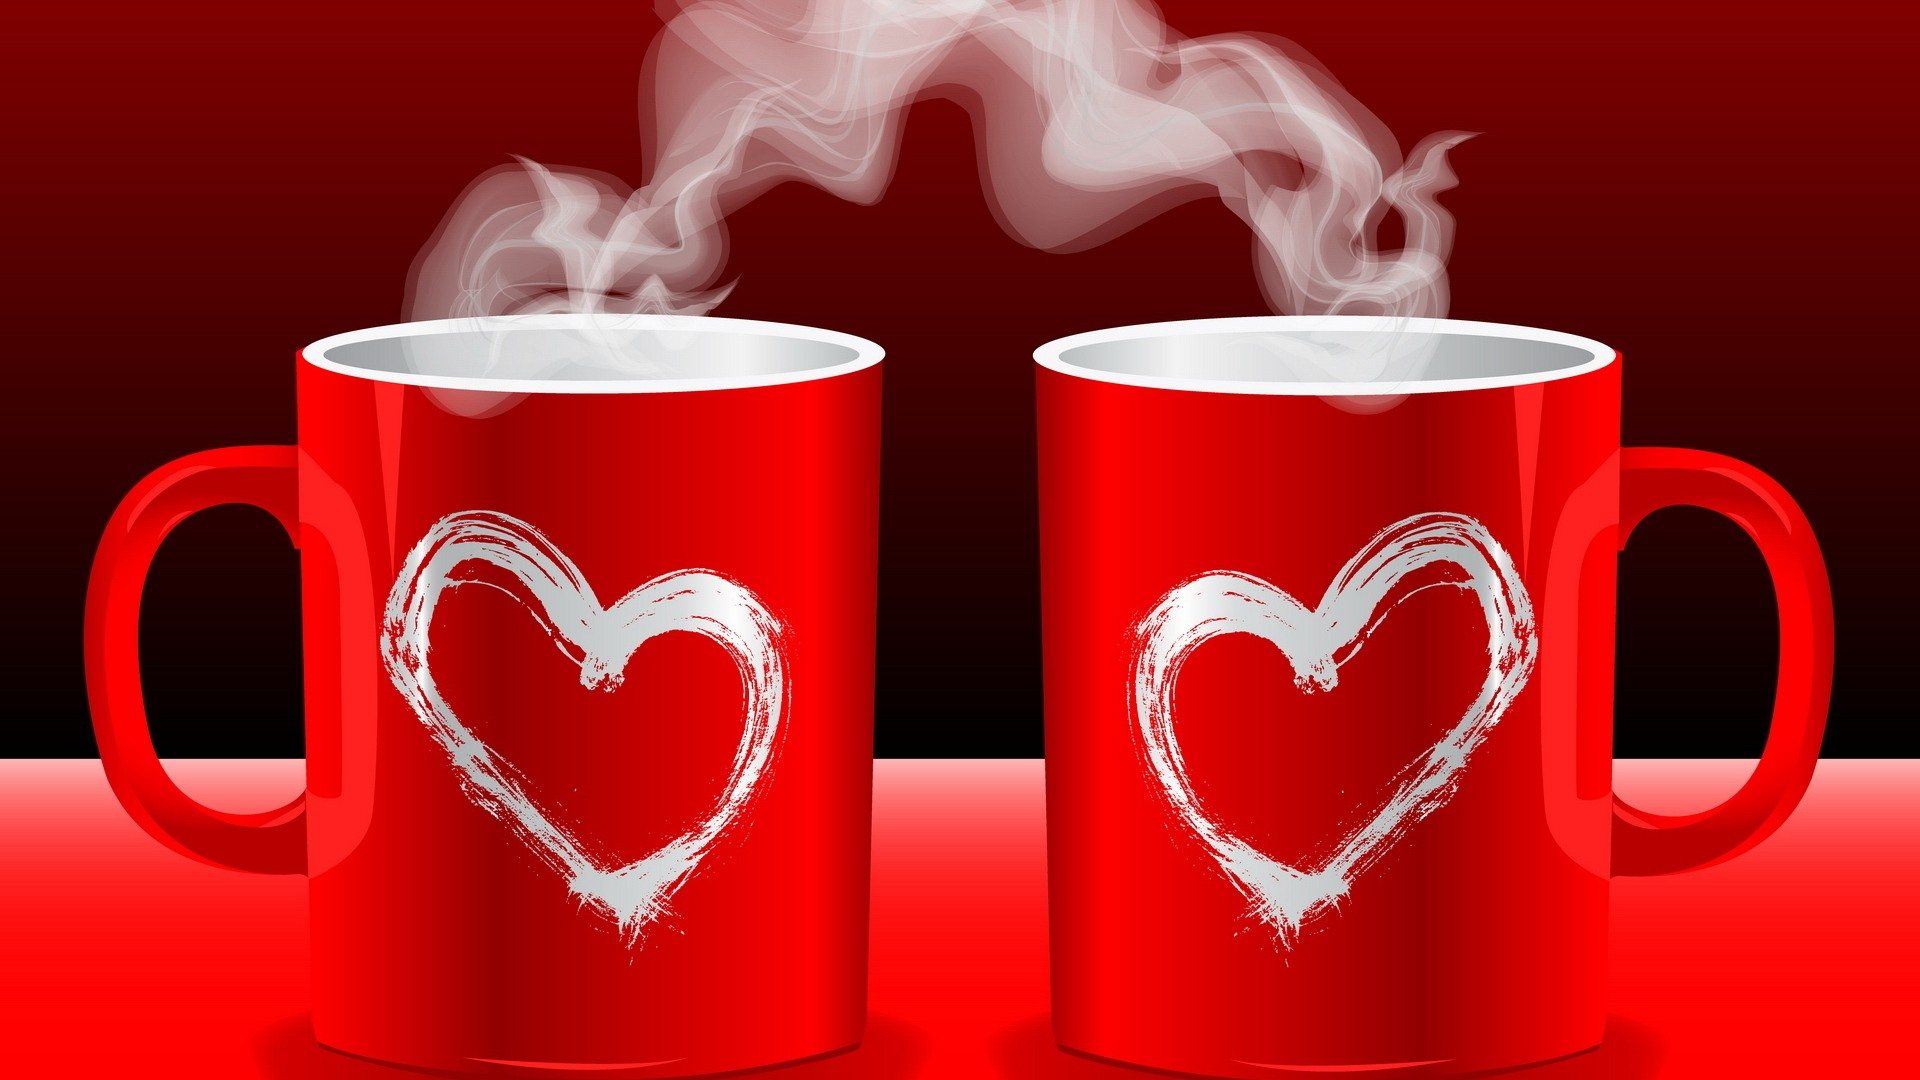 Good Morning Wallpaper & Picture - 14 February Valentine's Day - HD Wallpaper 